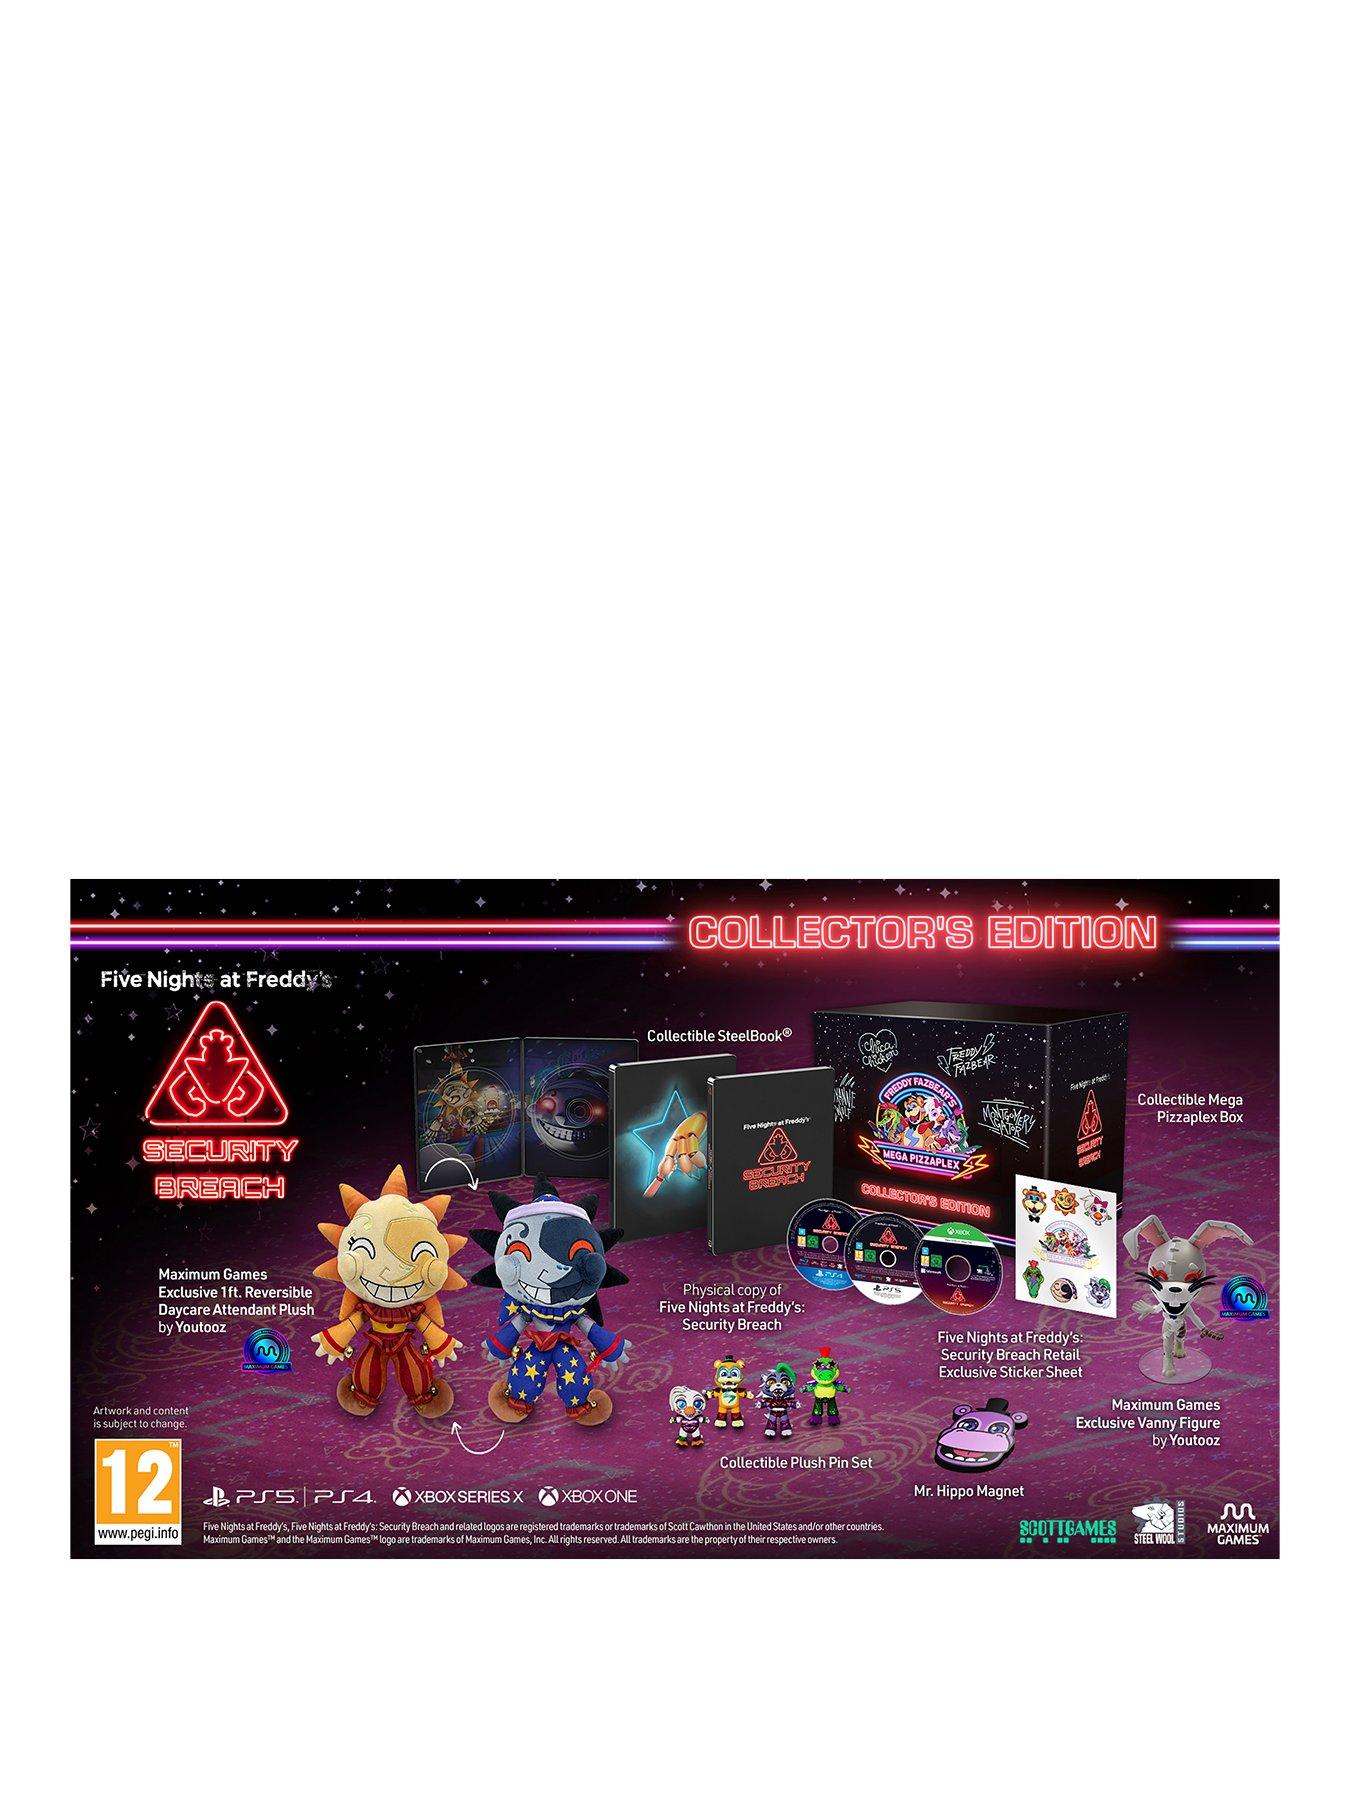 Five Nights at Freddy's Security Breach - PS4 PlayStation 4